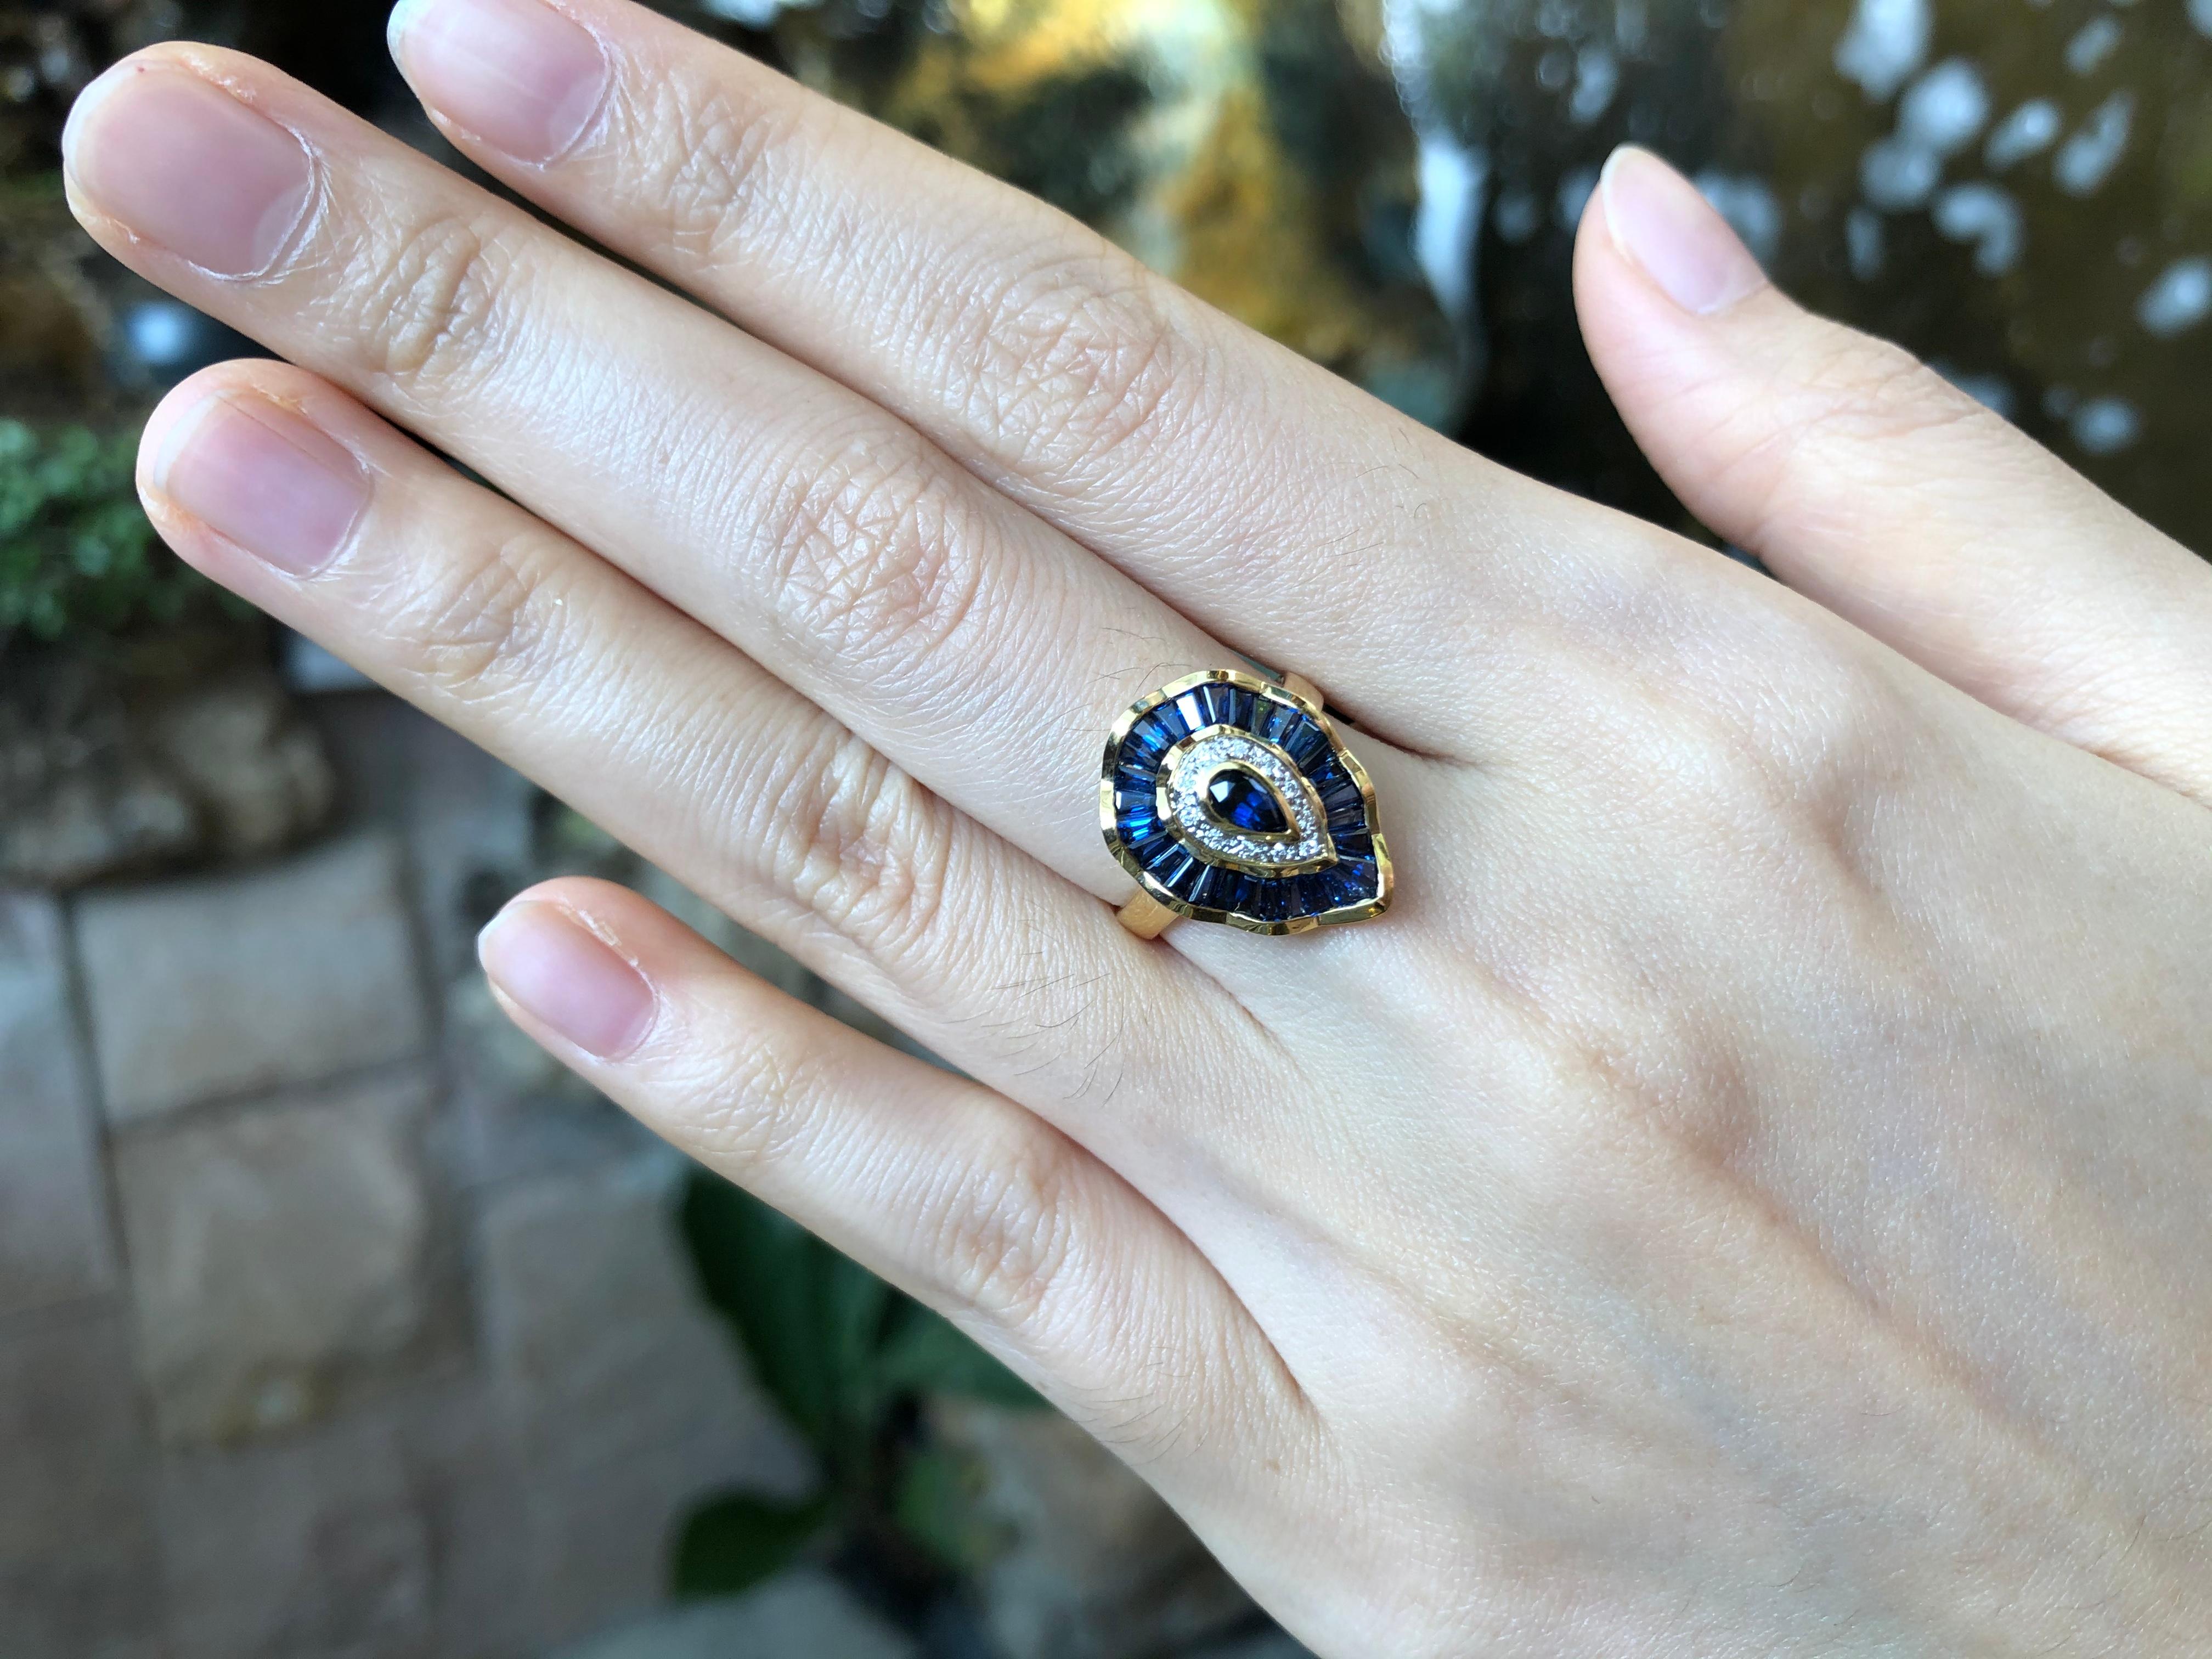 Blue Sapphire 2.73 carats with Diamond 0.07 carat Ring set in 18 Karat Gold Settings

Width:  1.3 cm 
Length: 1.8 cm
Ring Size: 52
Total Weight: 4.98 grams

